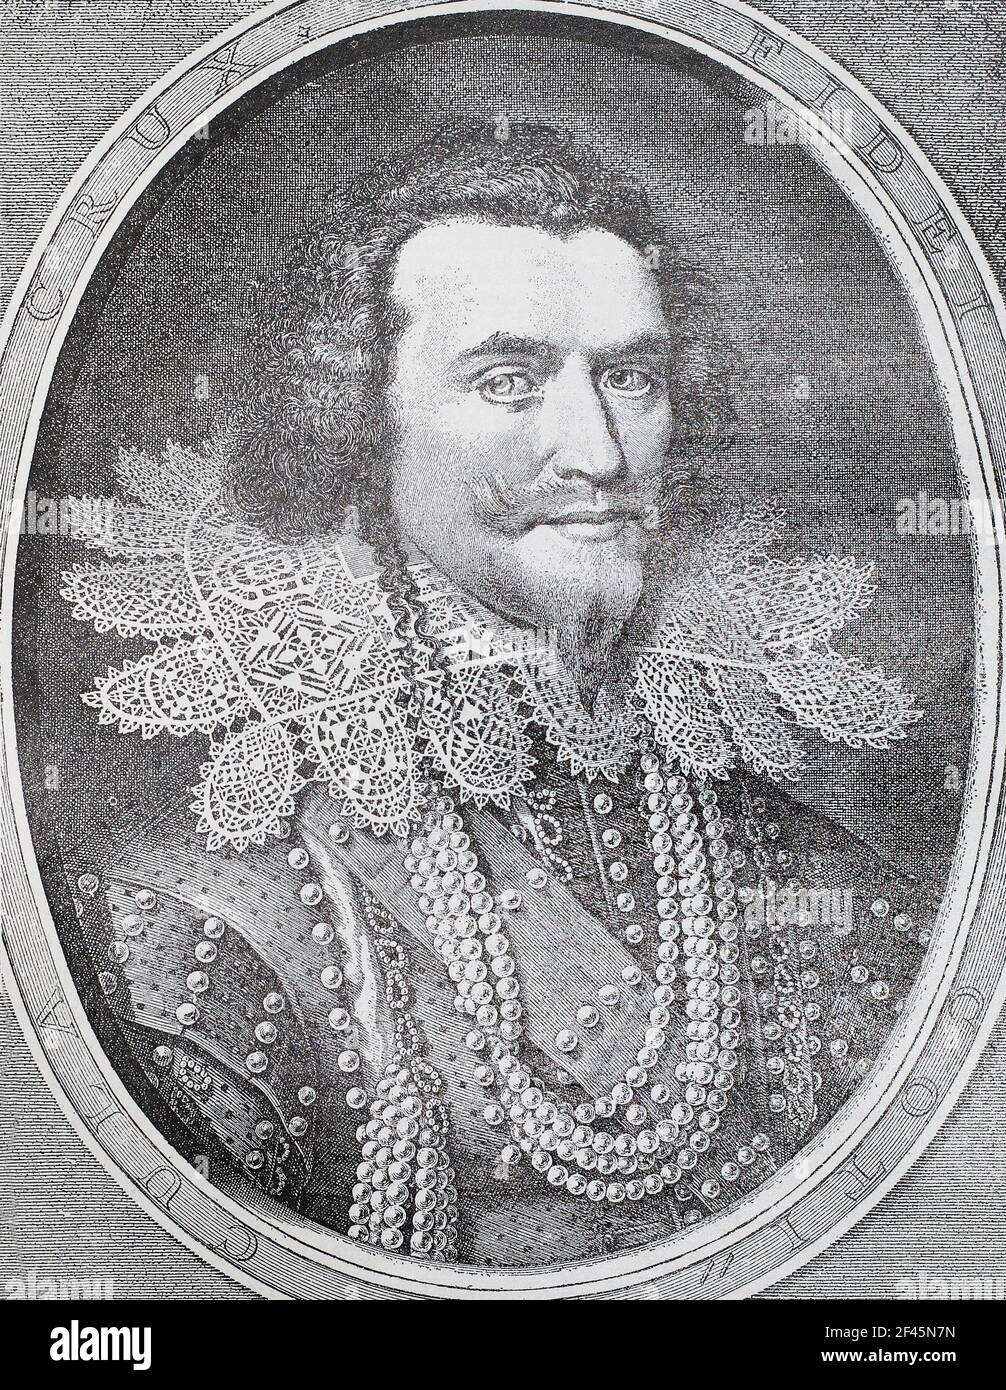 George Villiers, 1st Duke of Buckingham (1592 – 1628), was an English courtier, statesman, and patron of the arts. He was a favourite and possibly also a lover of King James I of England. Buckingham remained at the height of royal favour for the first three years of the reign of James' son, King Charles I, until a disgruntled army officer assassinated him. Engraving of 1626. Stock Photo